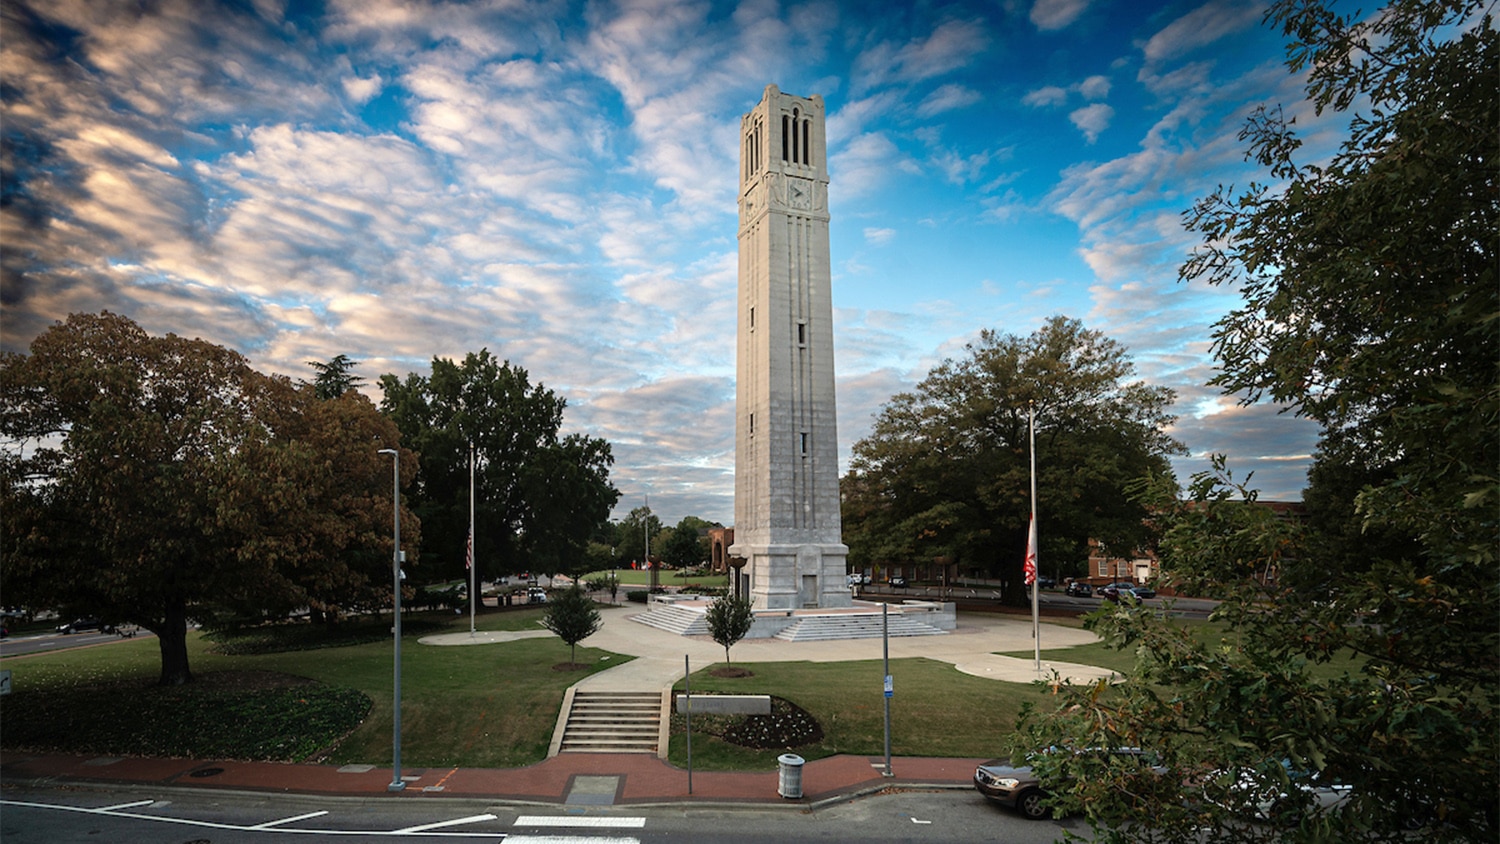 The NC State Belltower on a fall evening